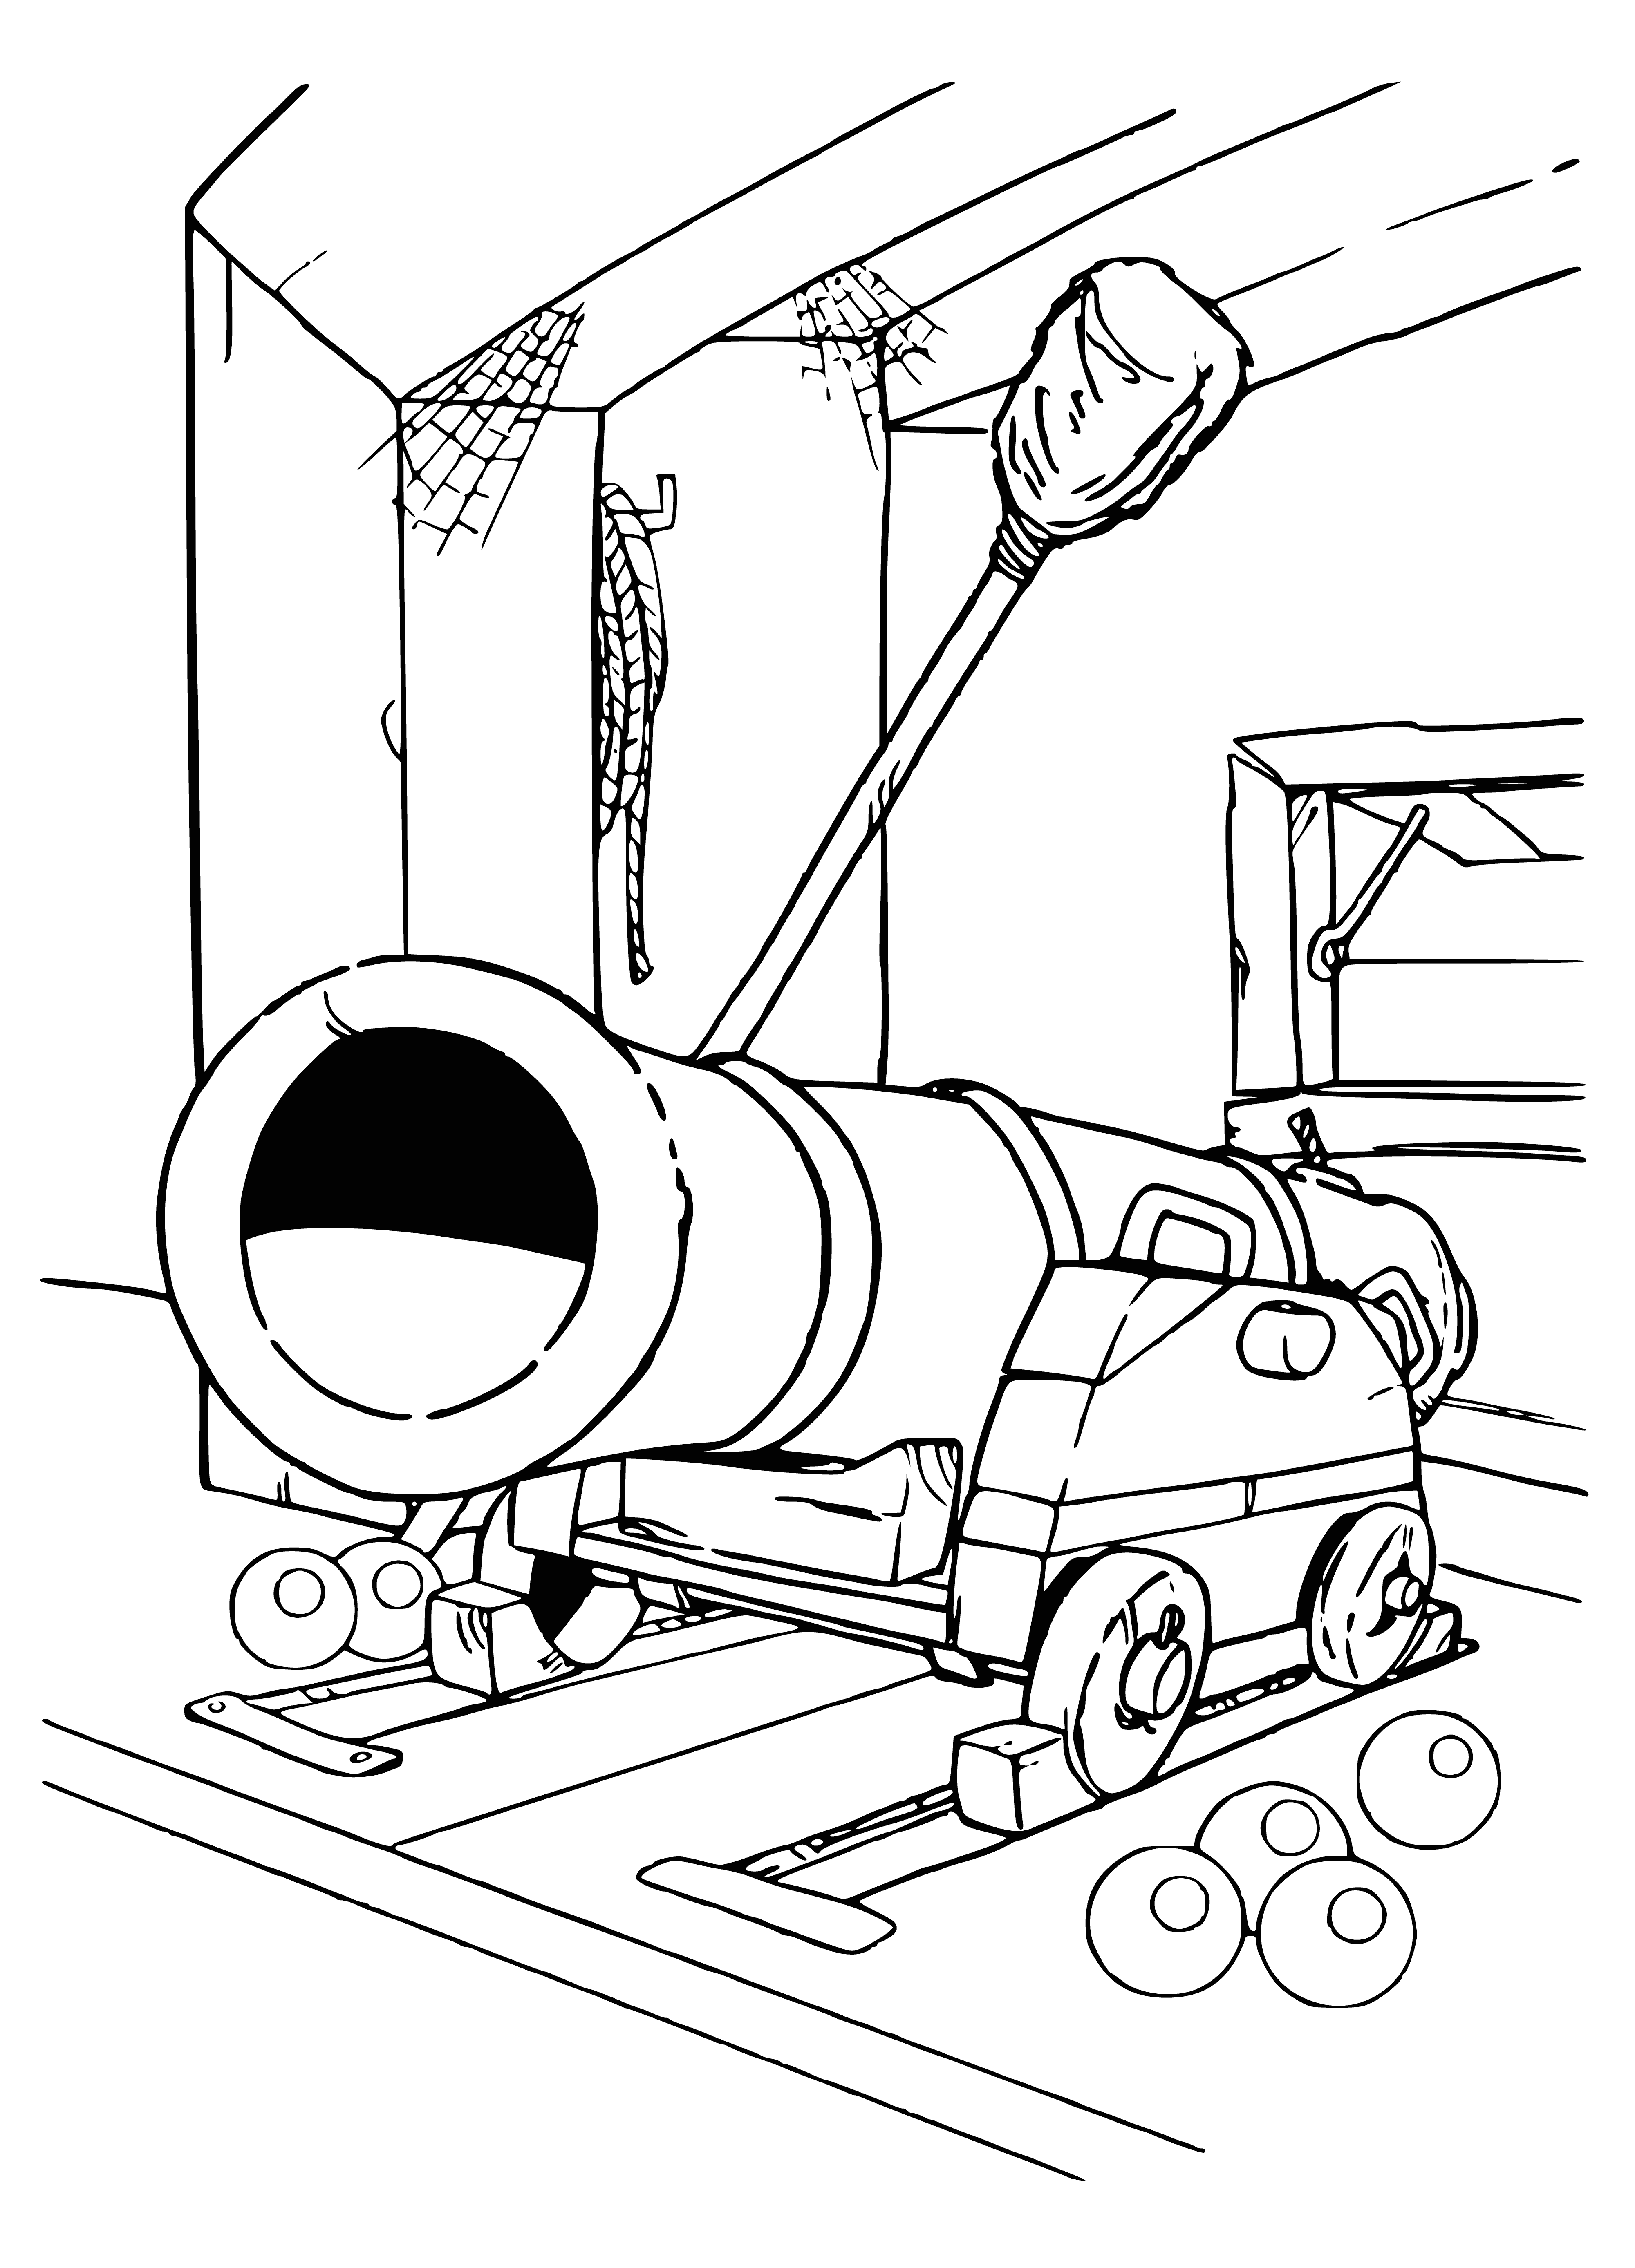 coloring page: Large metal cannon w/ long barrel and 2 handles. Small door at back. Placed on front, left side of ship. #maritimes #navalservice